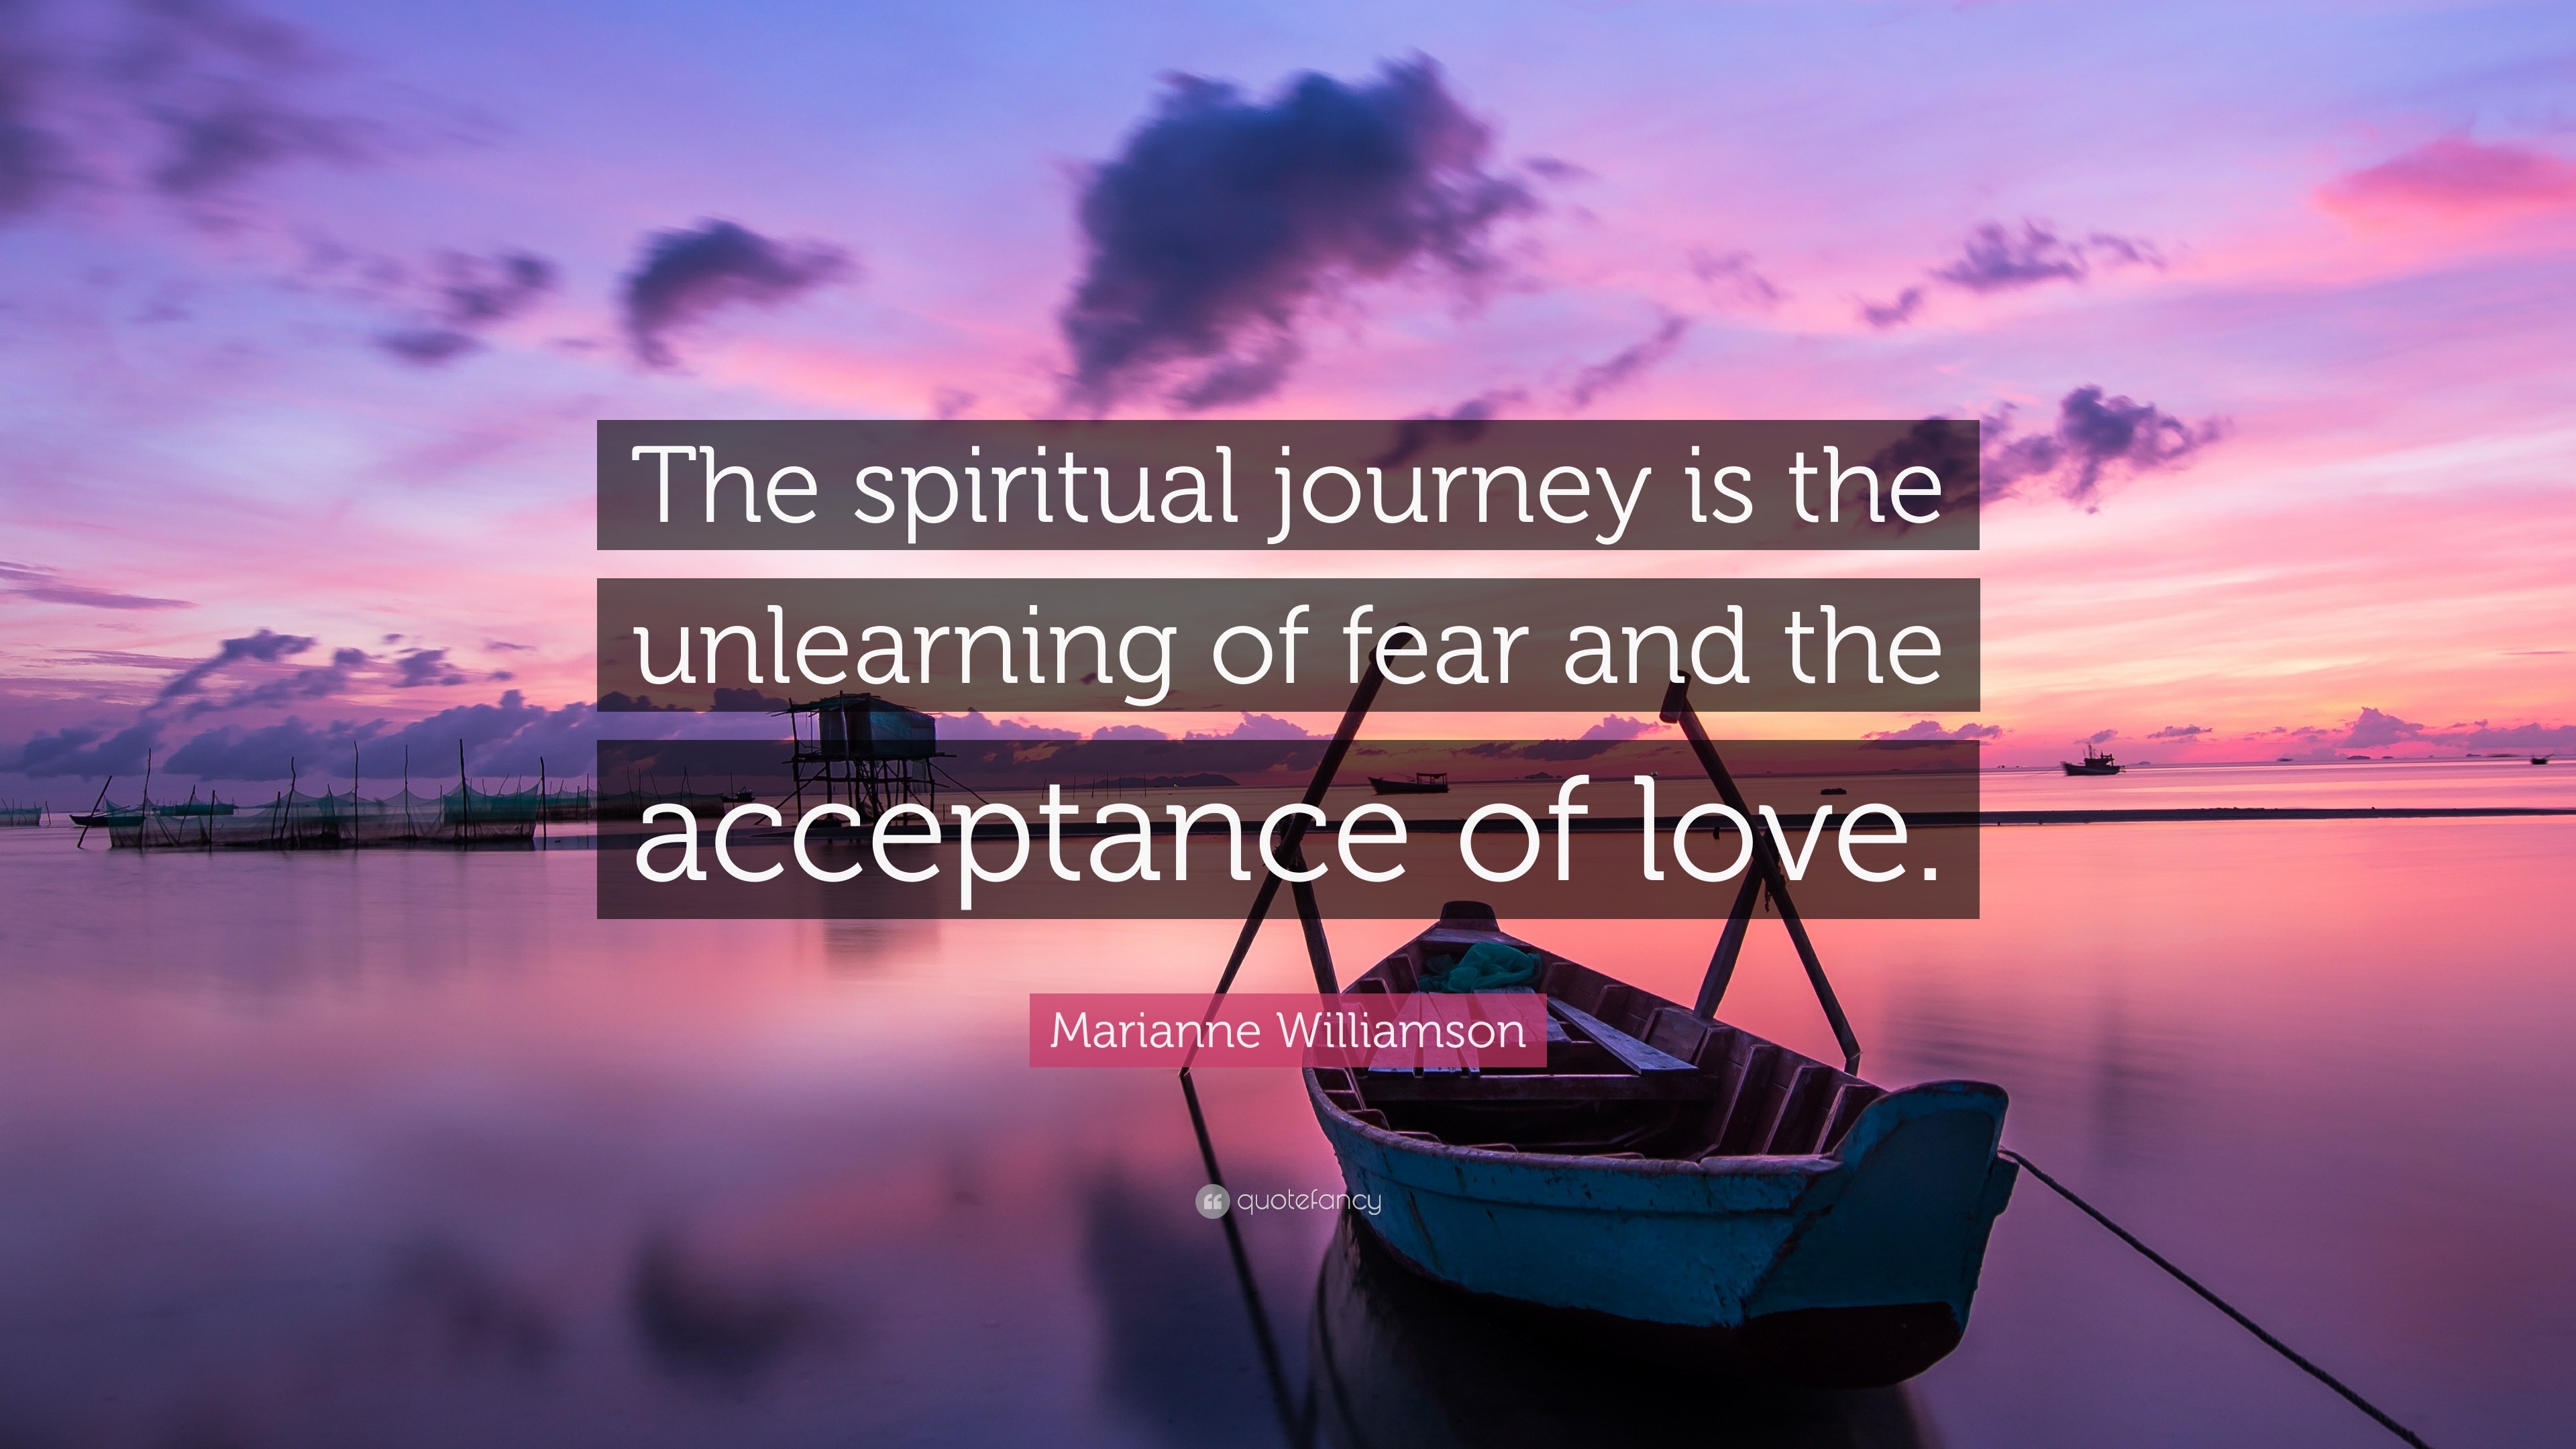 Marianne Williamson Quote: “The spiritual journey is the